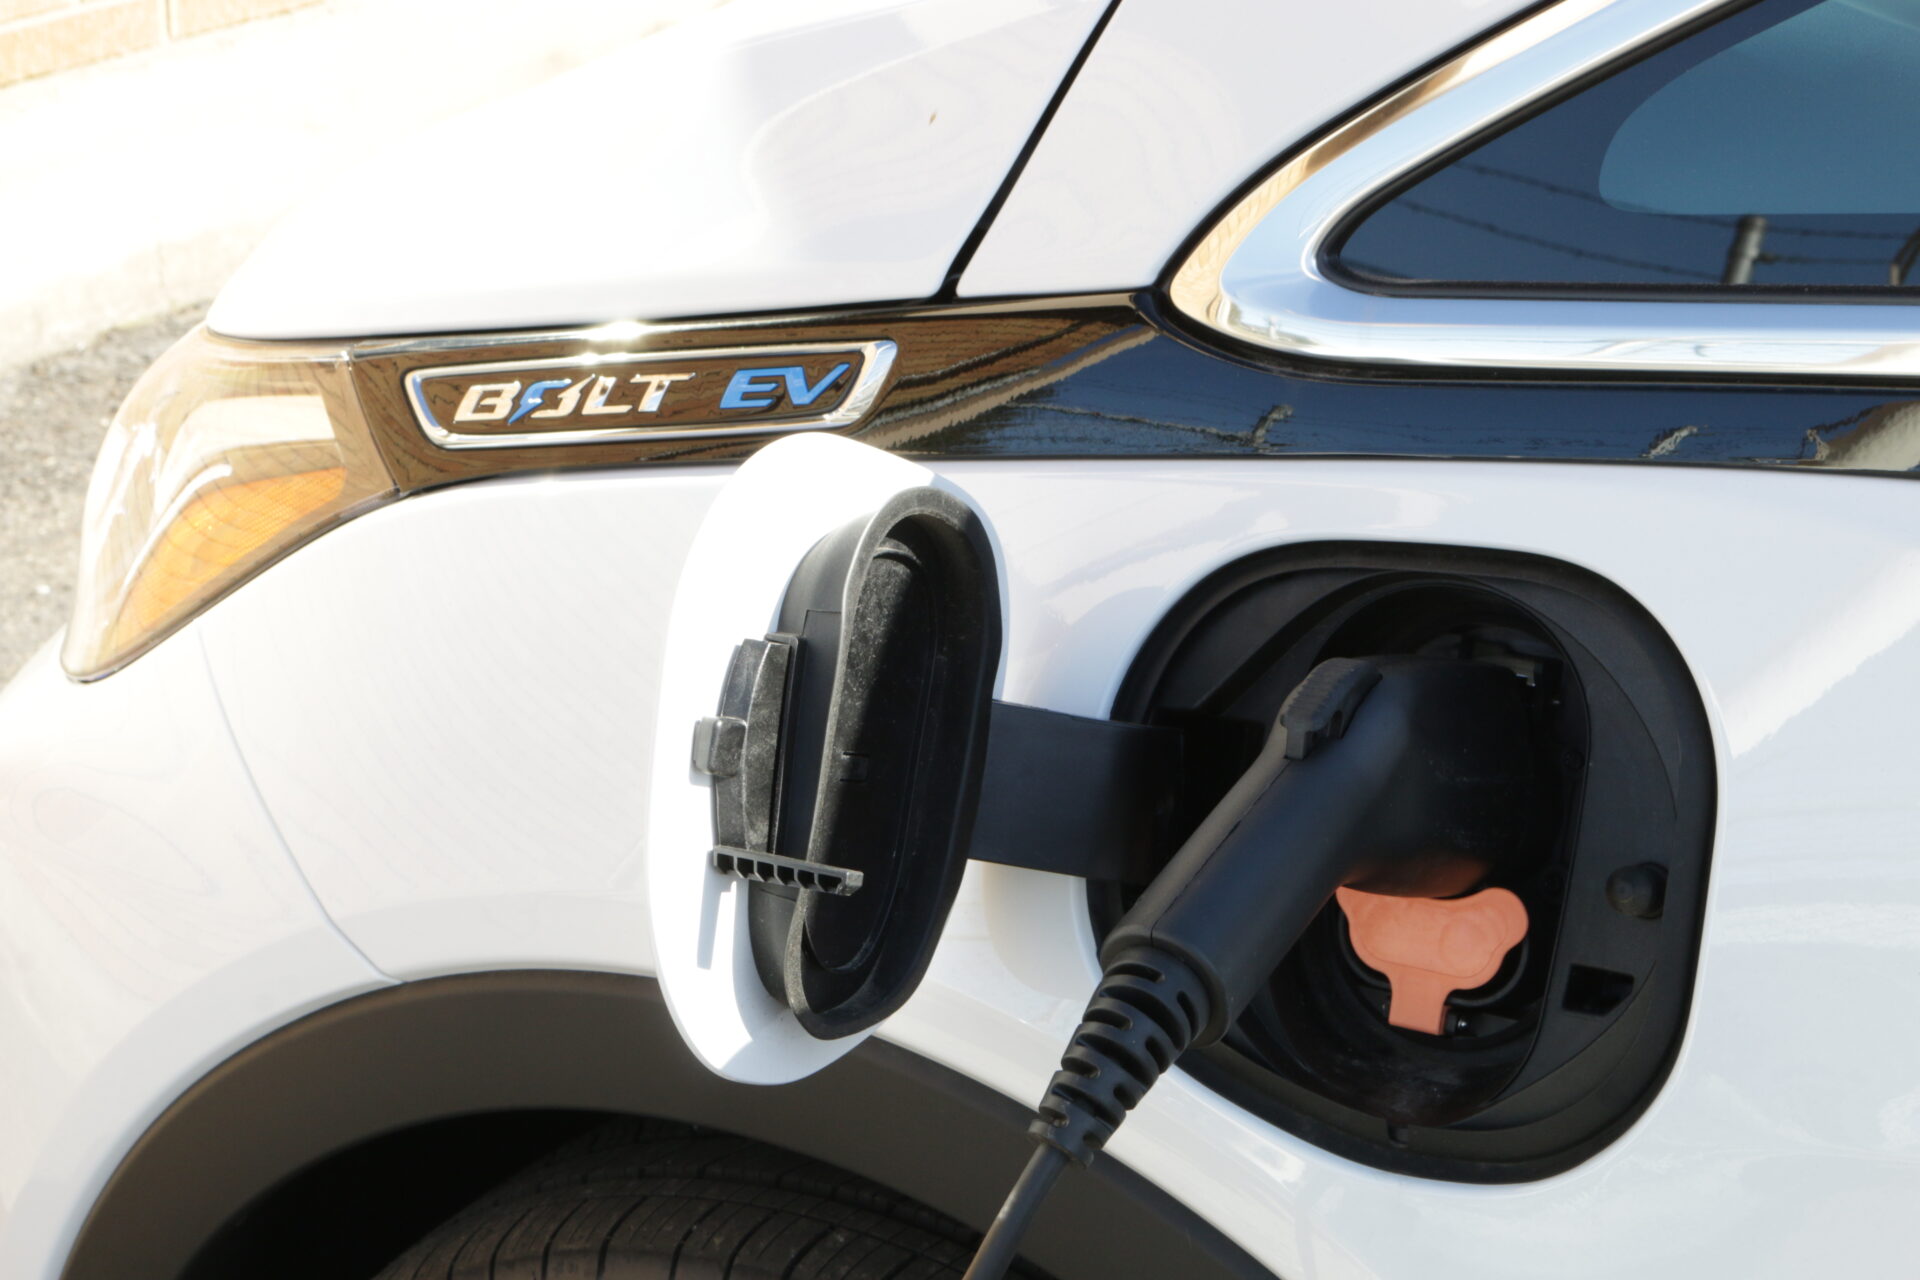 Chevy Bolt electric vehicle charger is plugged in and charging the battery